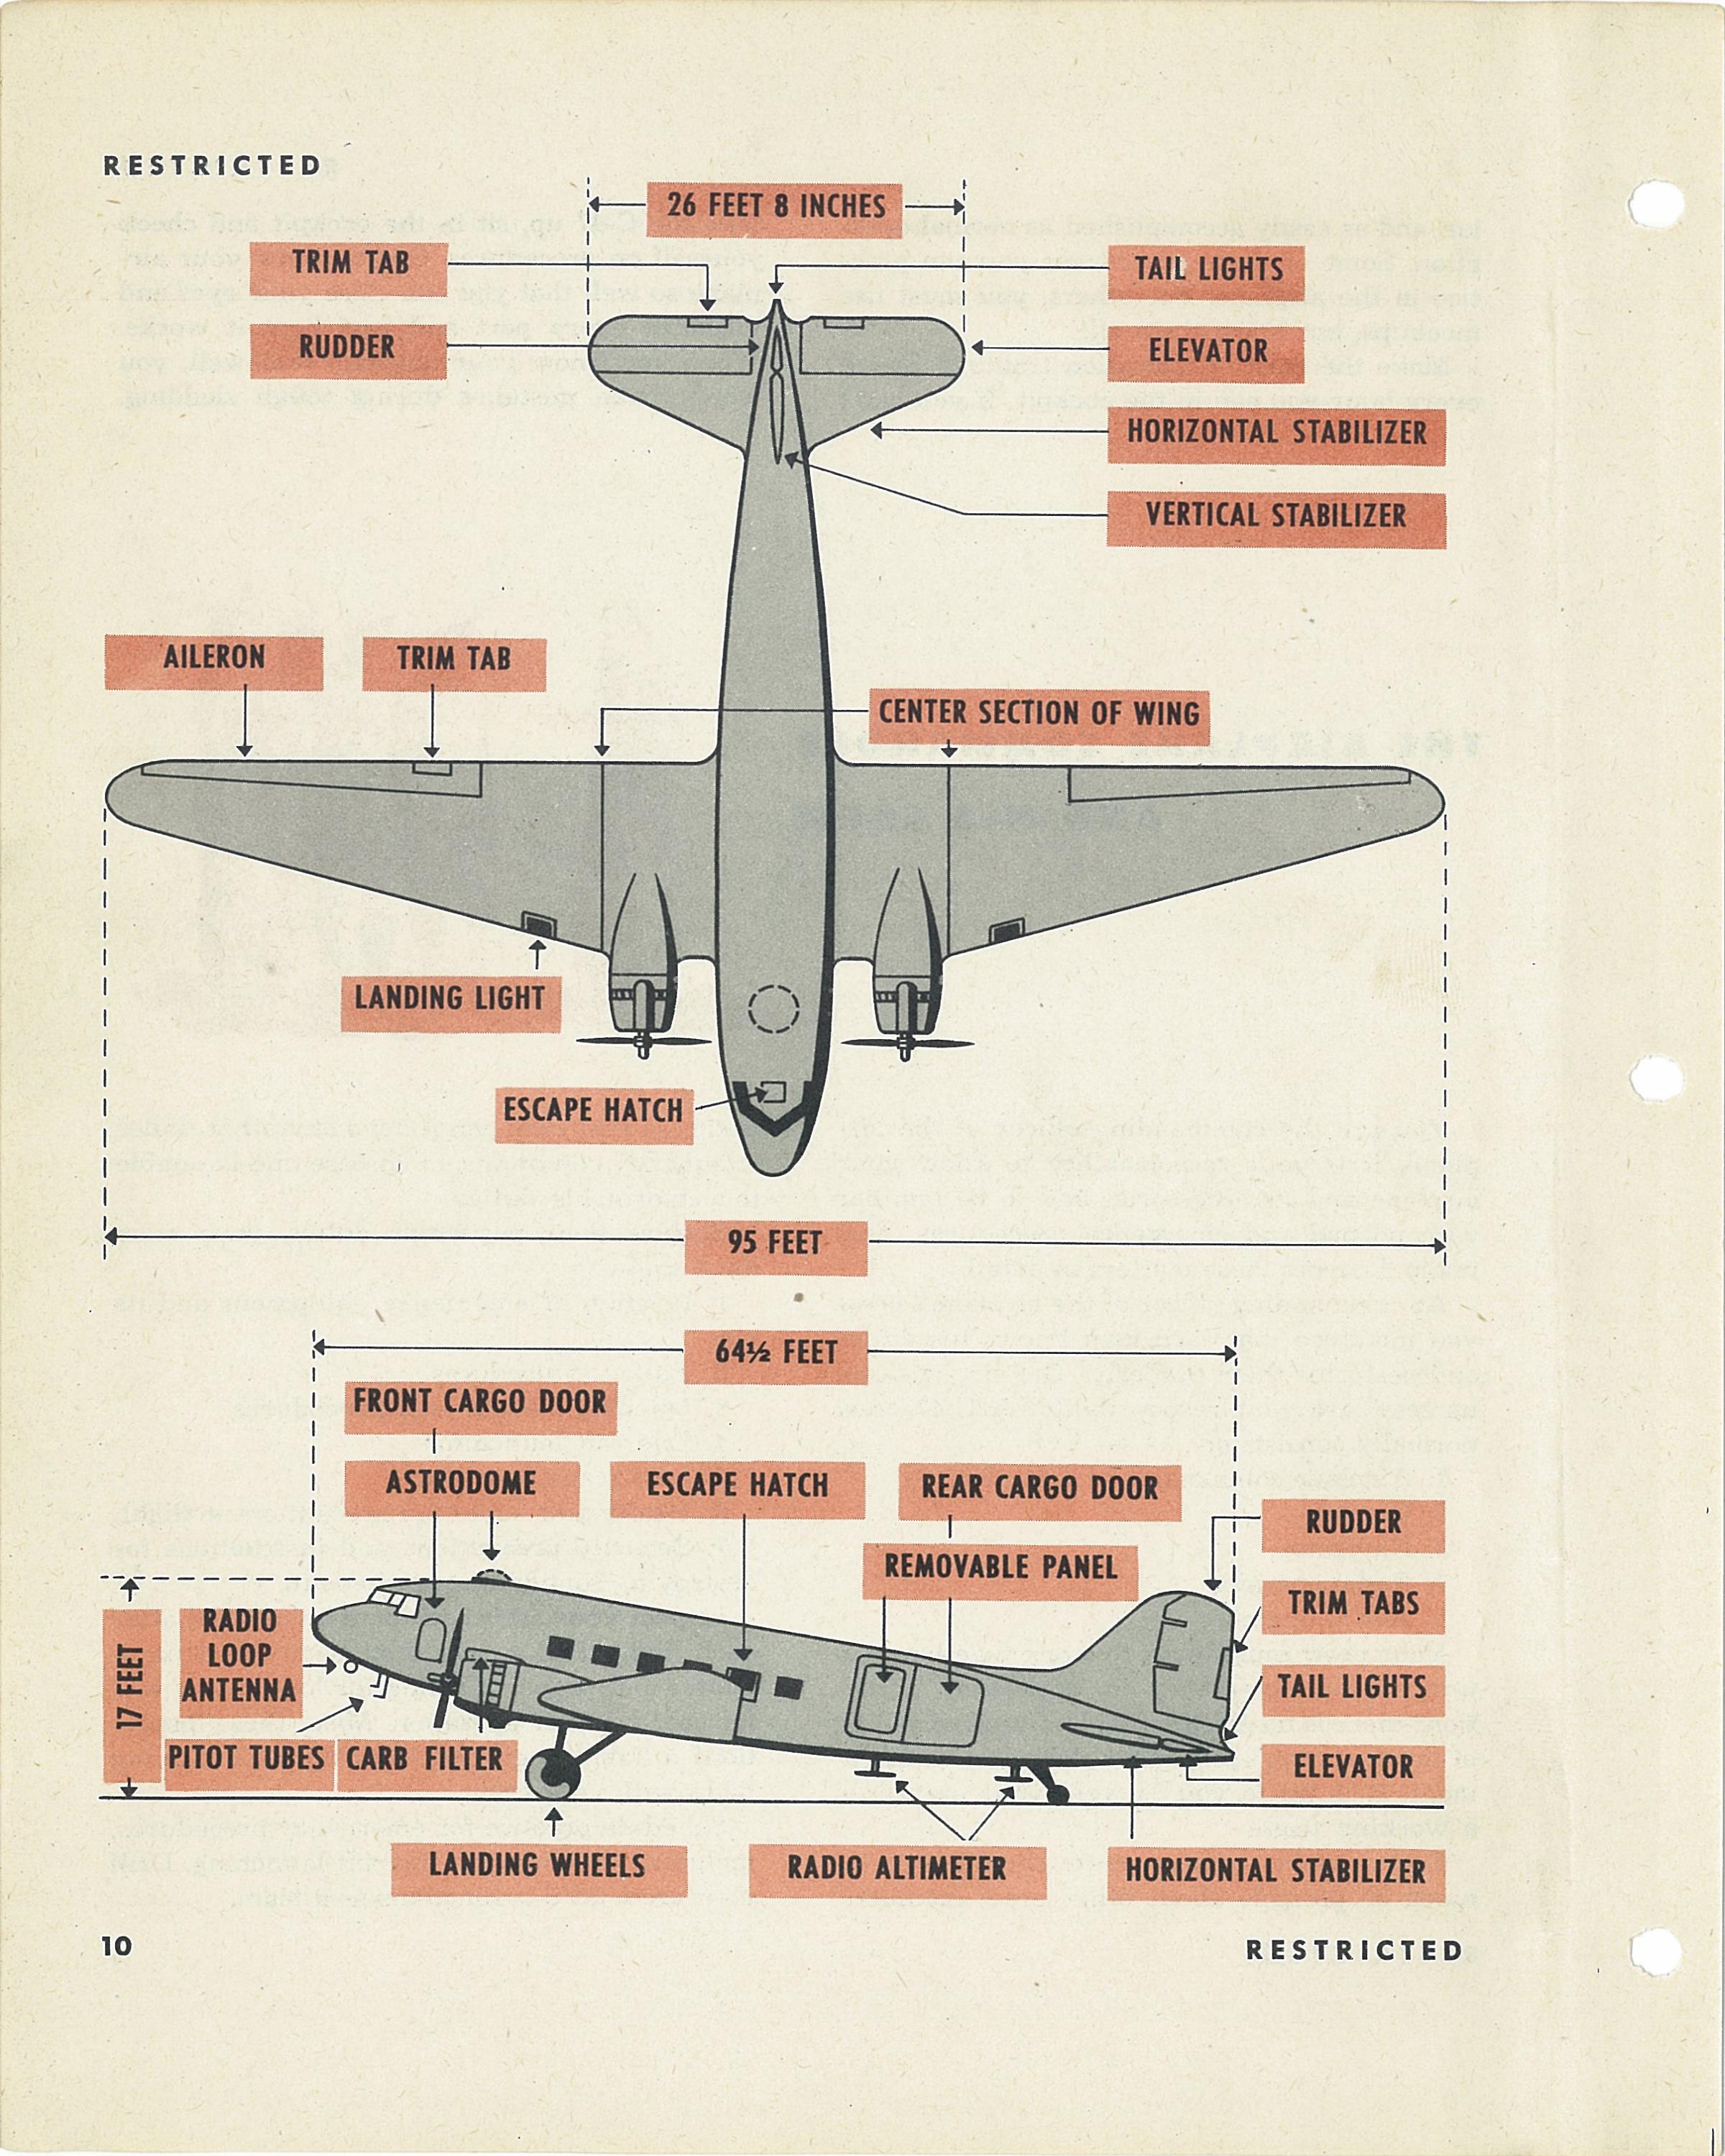 Sample page 12 from AirCorps Library document: Pilot Training Manual for the C-47 Skytrain